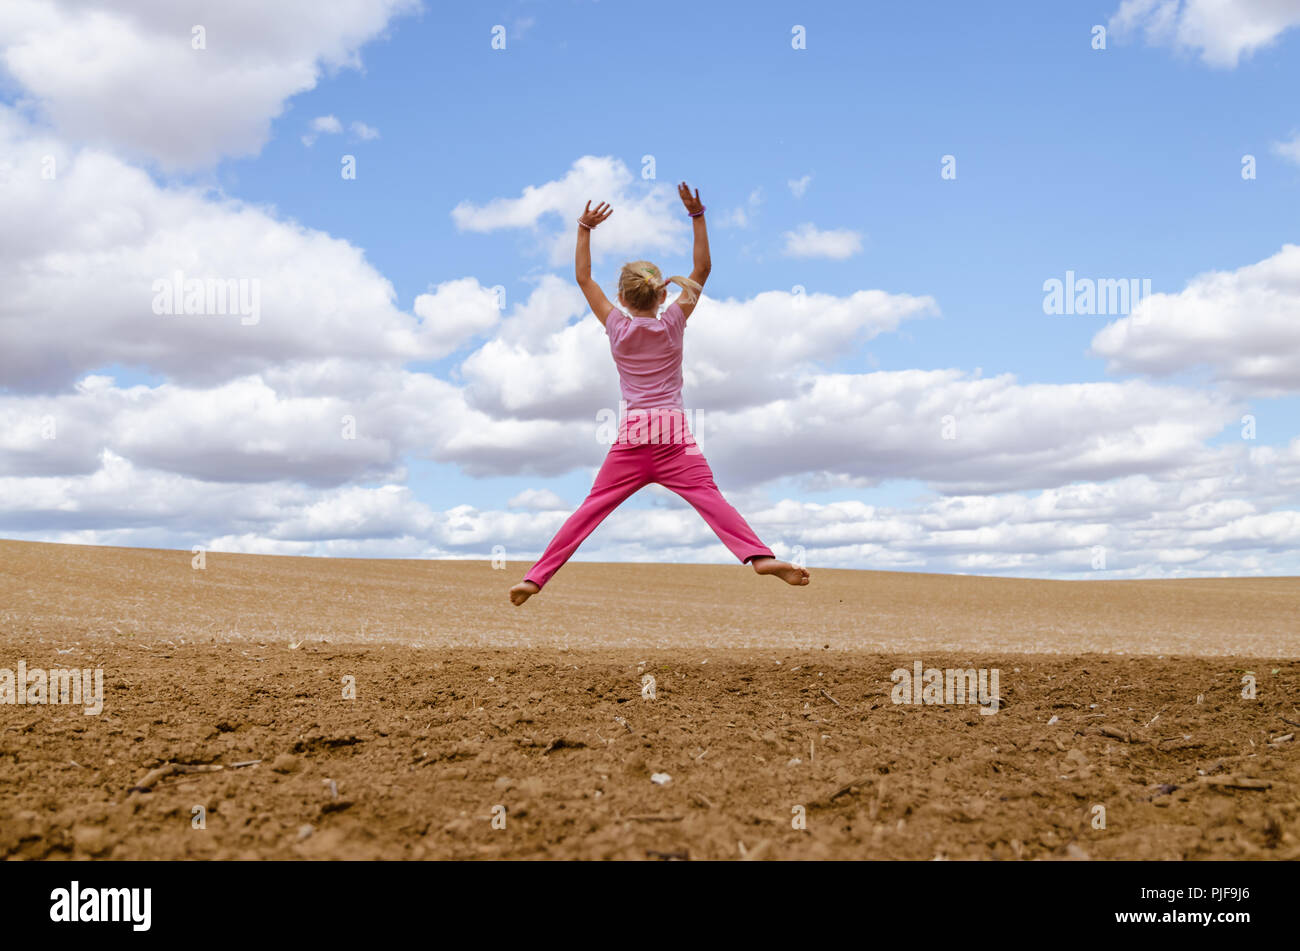 little child jumping alone in country in scenic countryside with beautiful clouds and blue sky Stock Photo